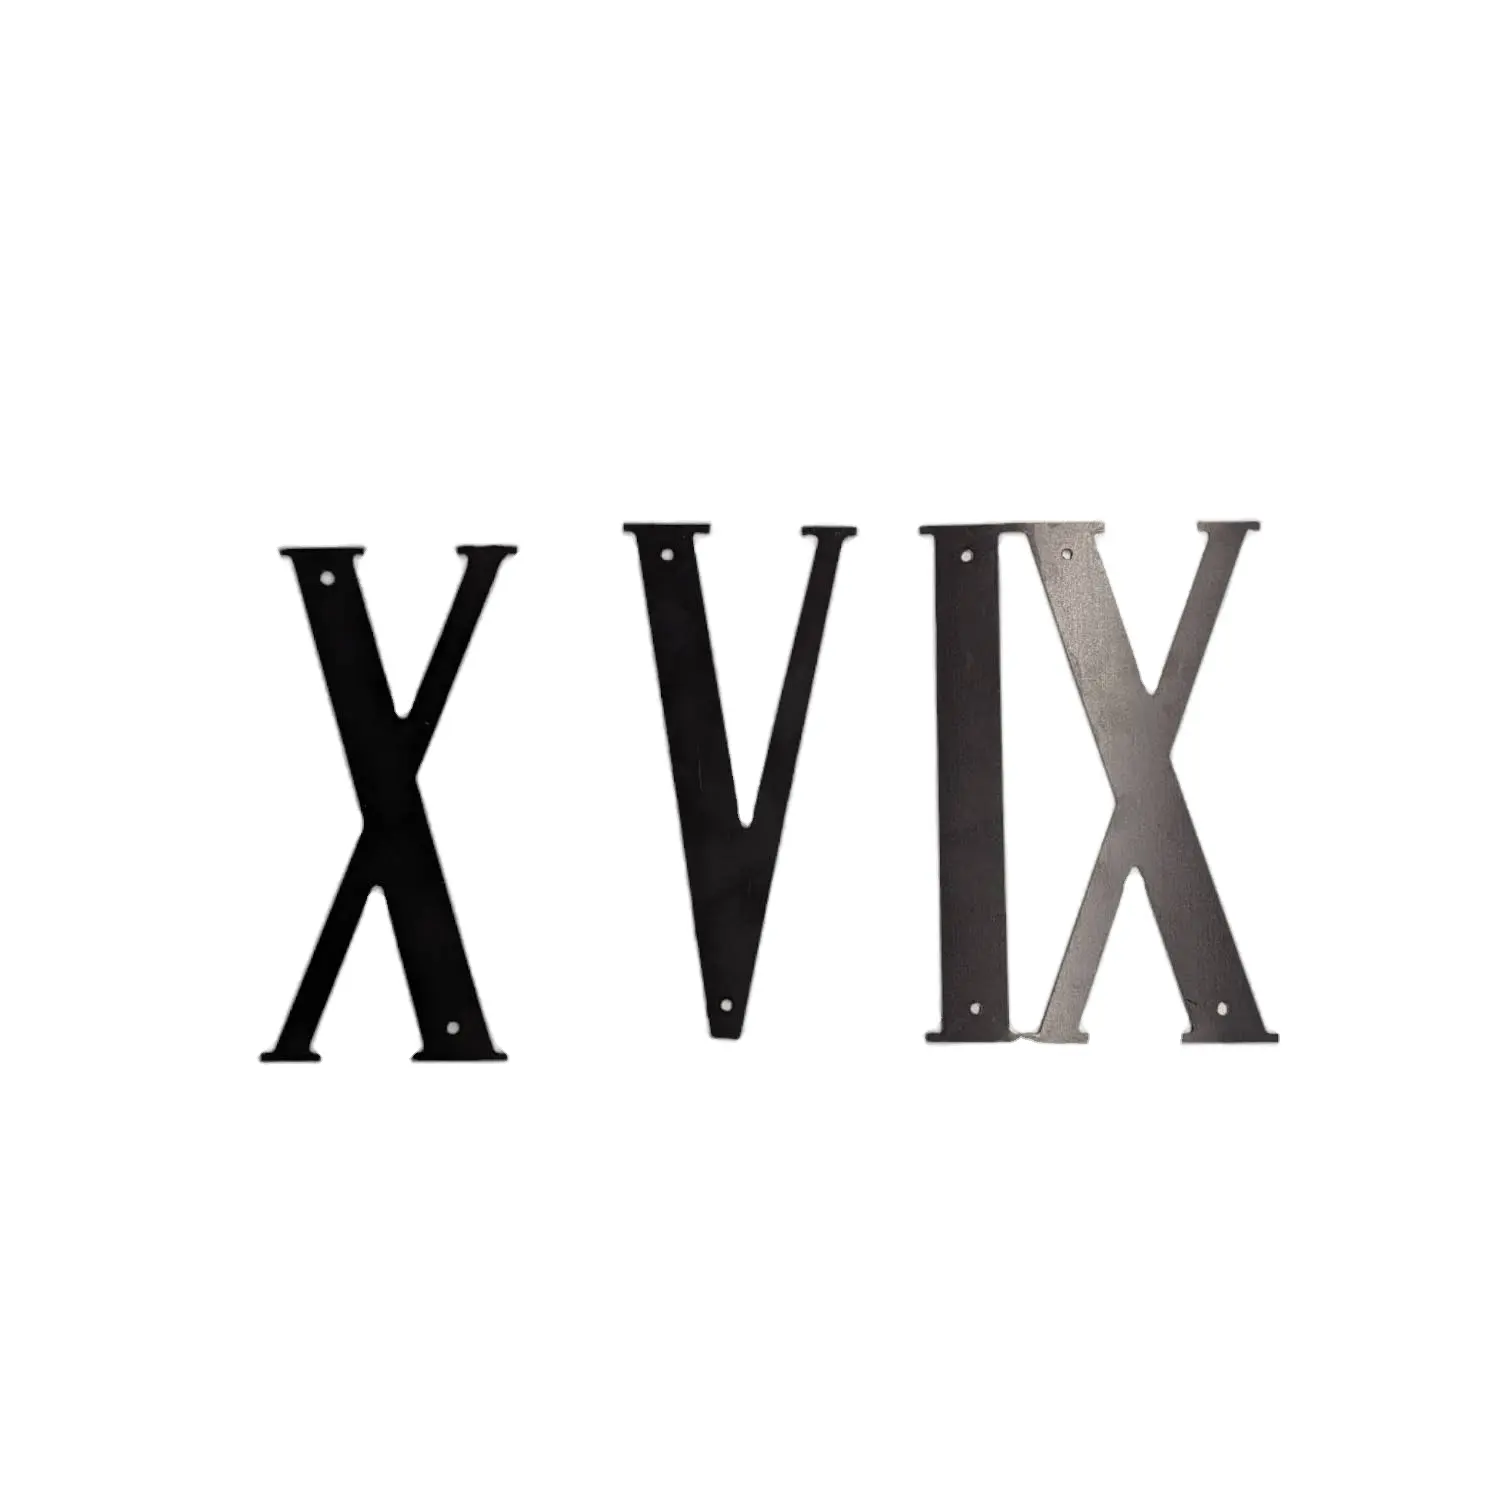 Made in Italy Series of Roman Numerals in Black Aluminum On Measure Made in Italy for Tower Clock or Facade Clock